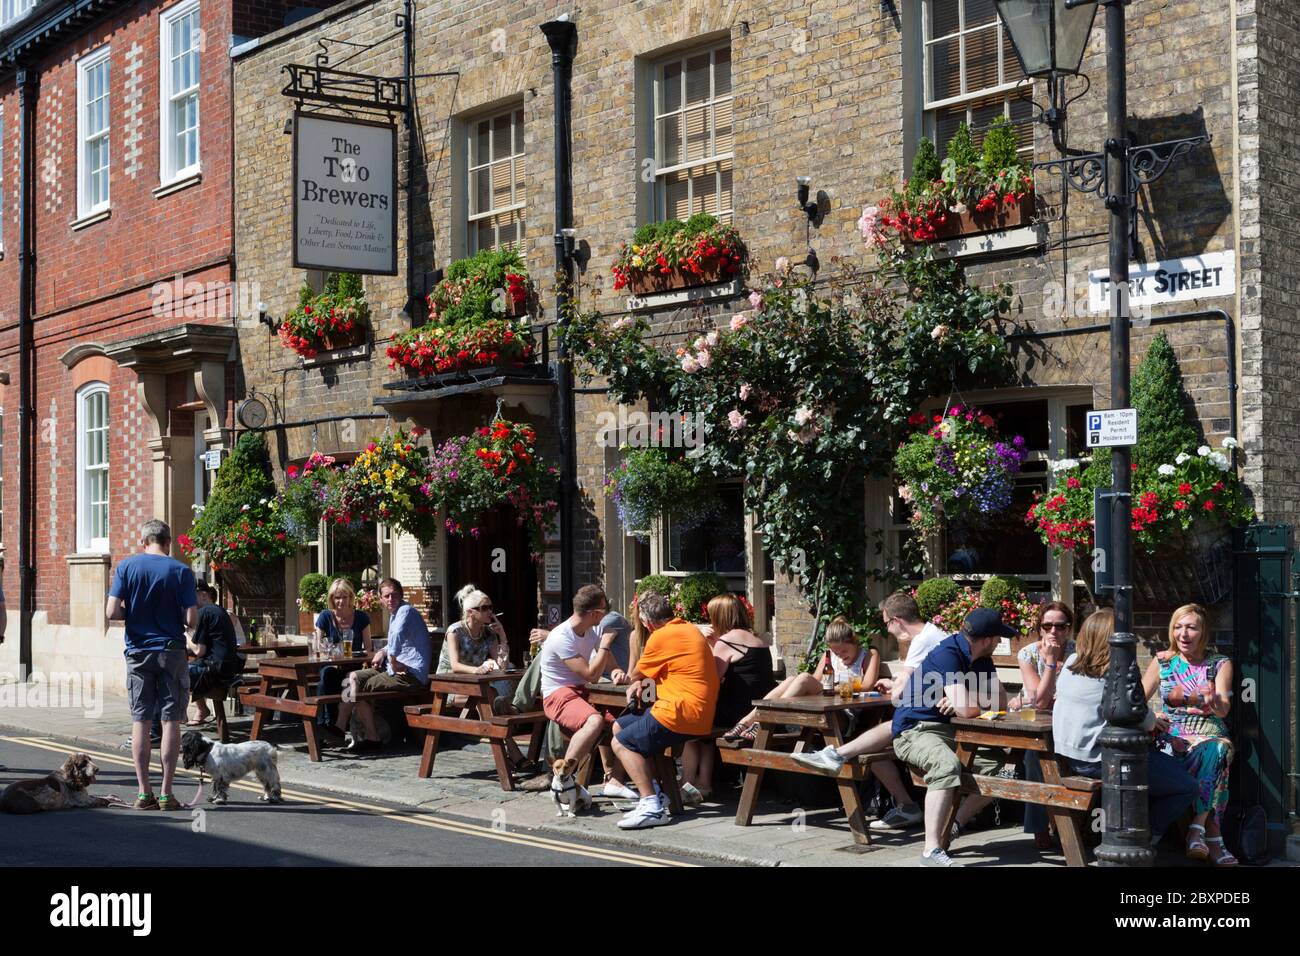 The Two Brewers pub on Park Street, Windsor, Berkshire, Inghilterra, Regno Unito, Europa Foto Stock